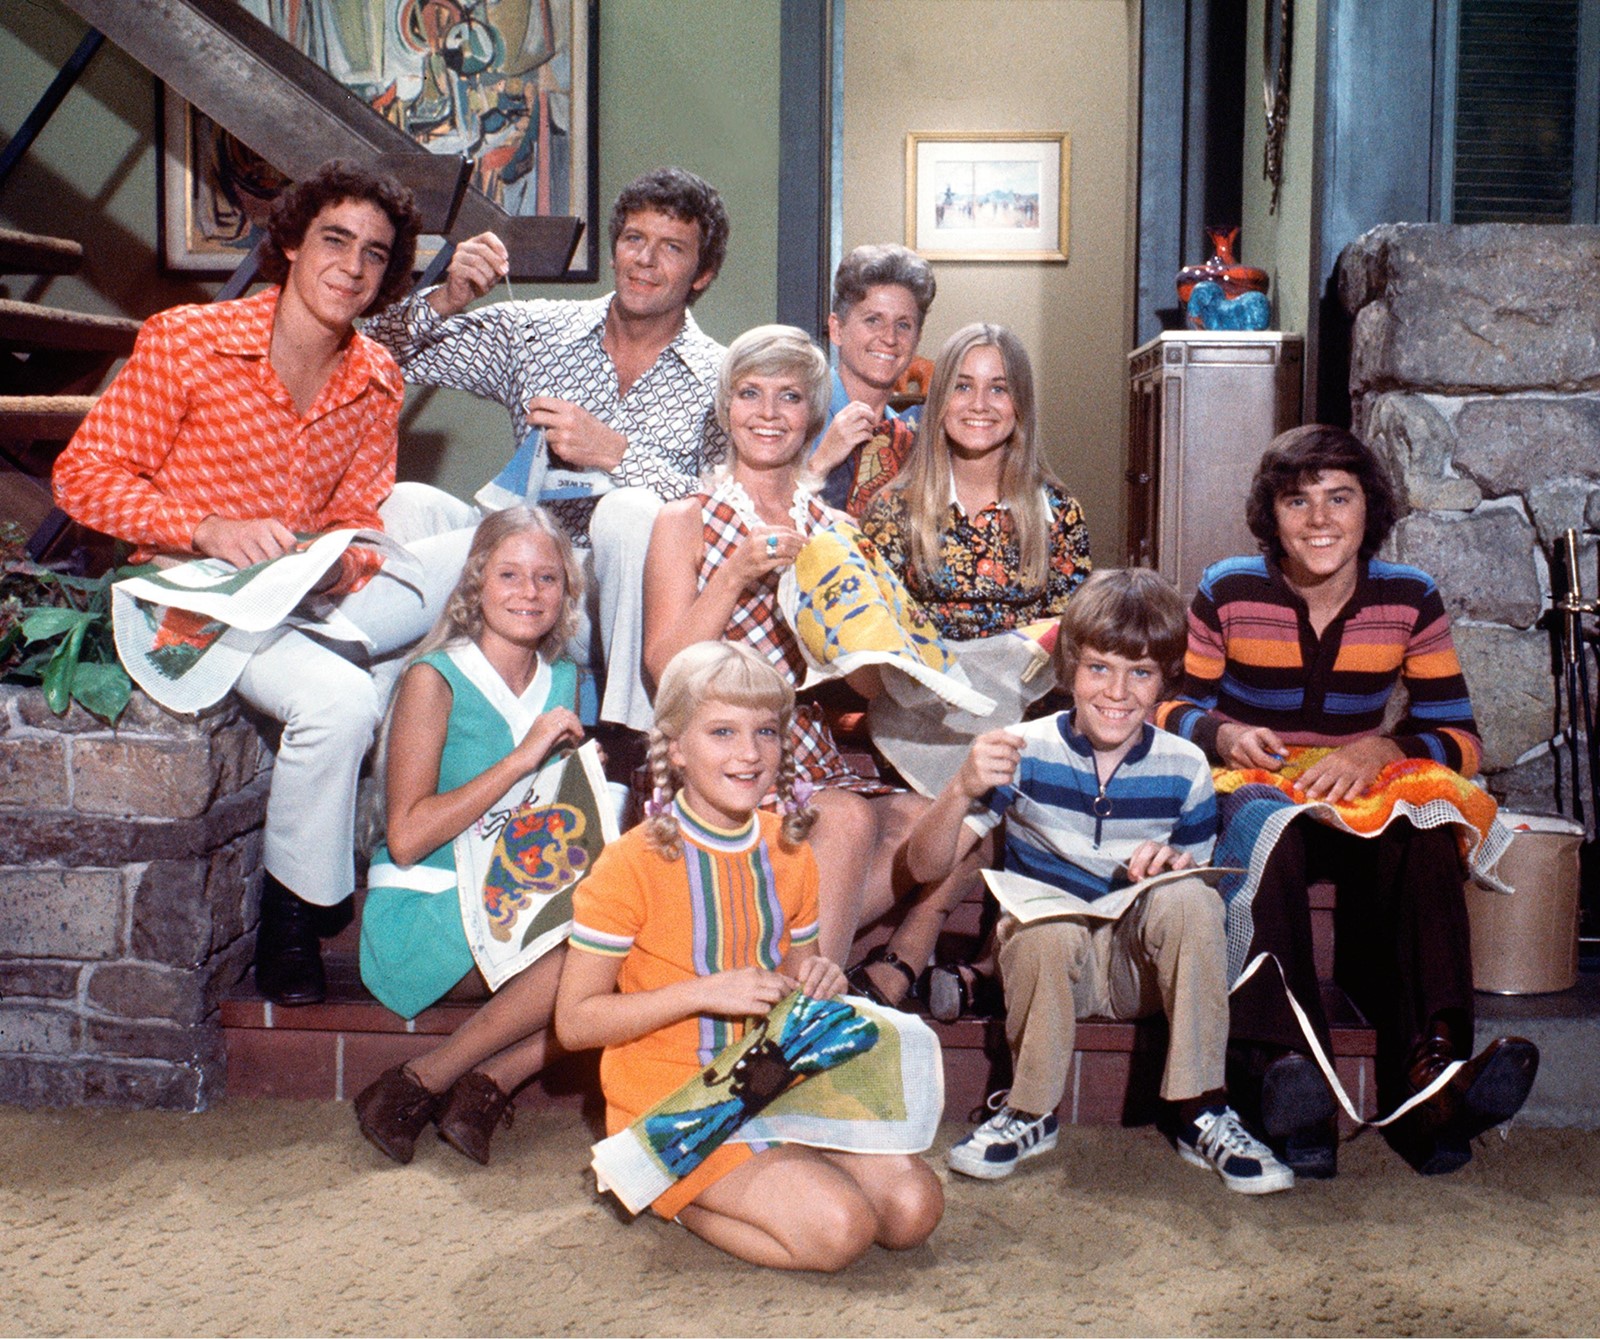 daniel metivier recommends X Rated Brady Bunch